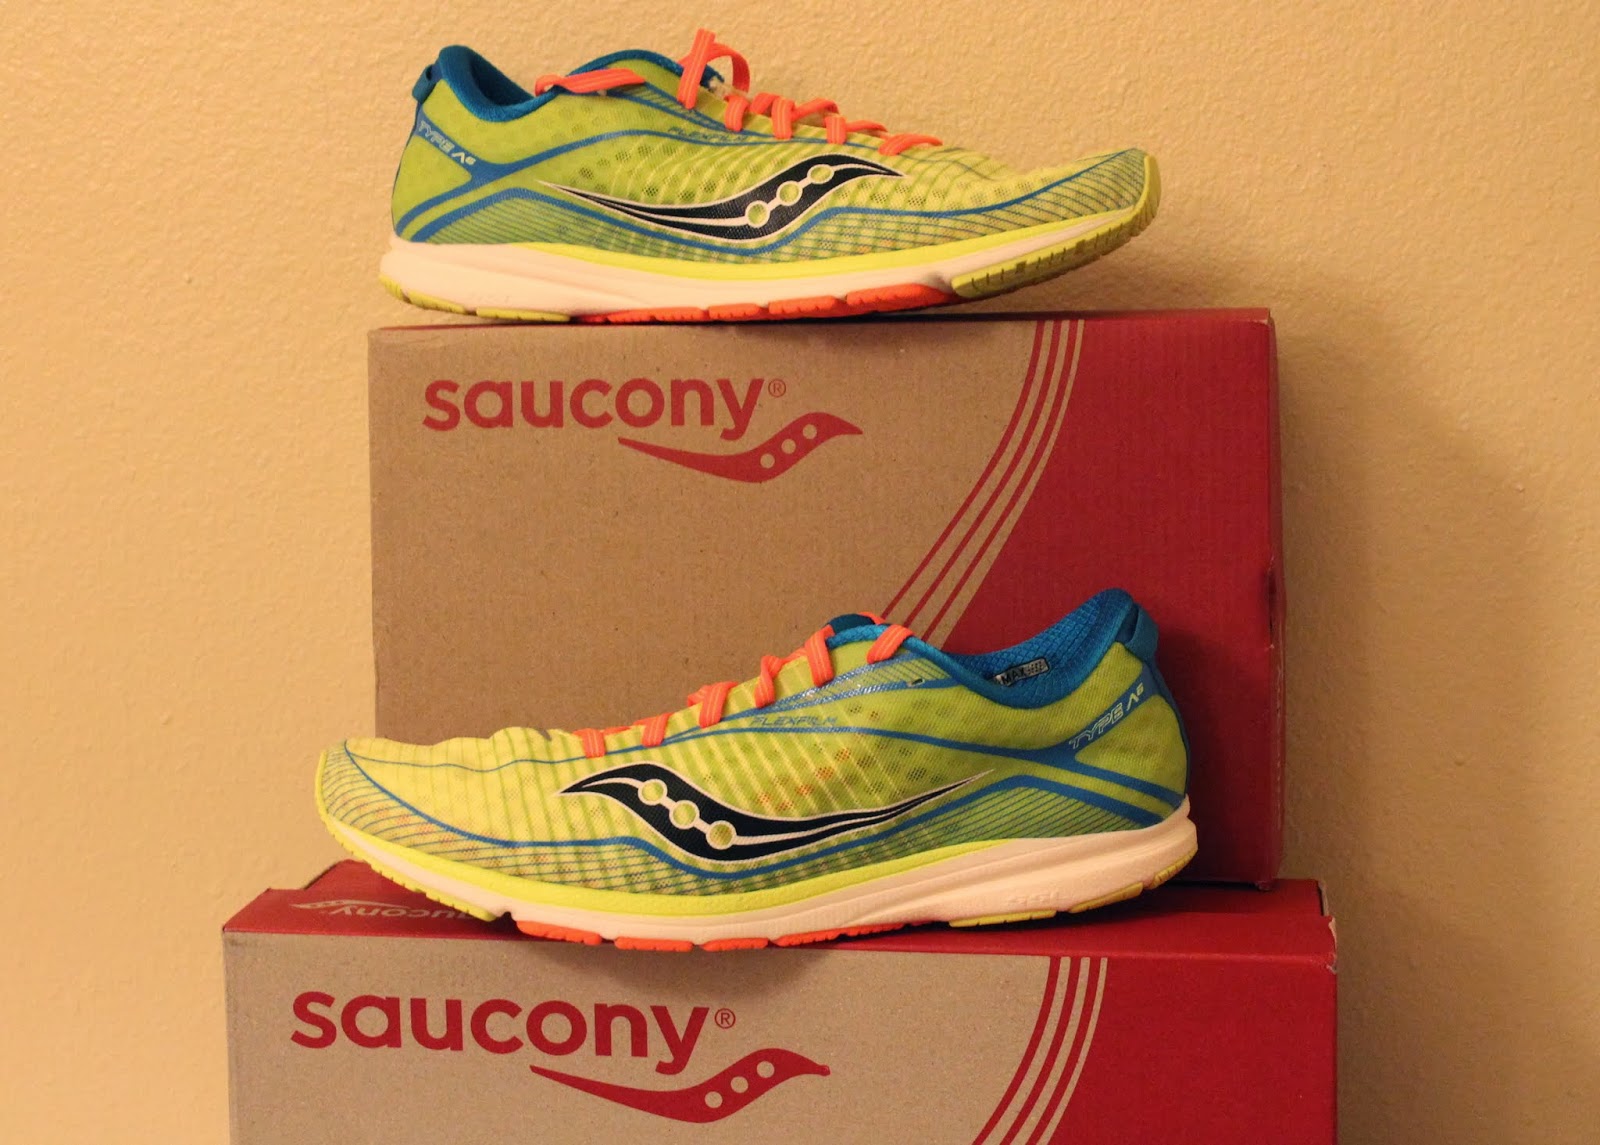 saucony type a6 sizing